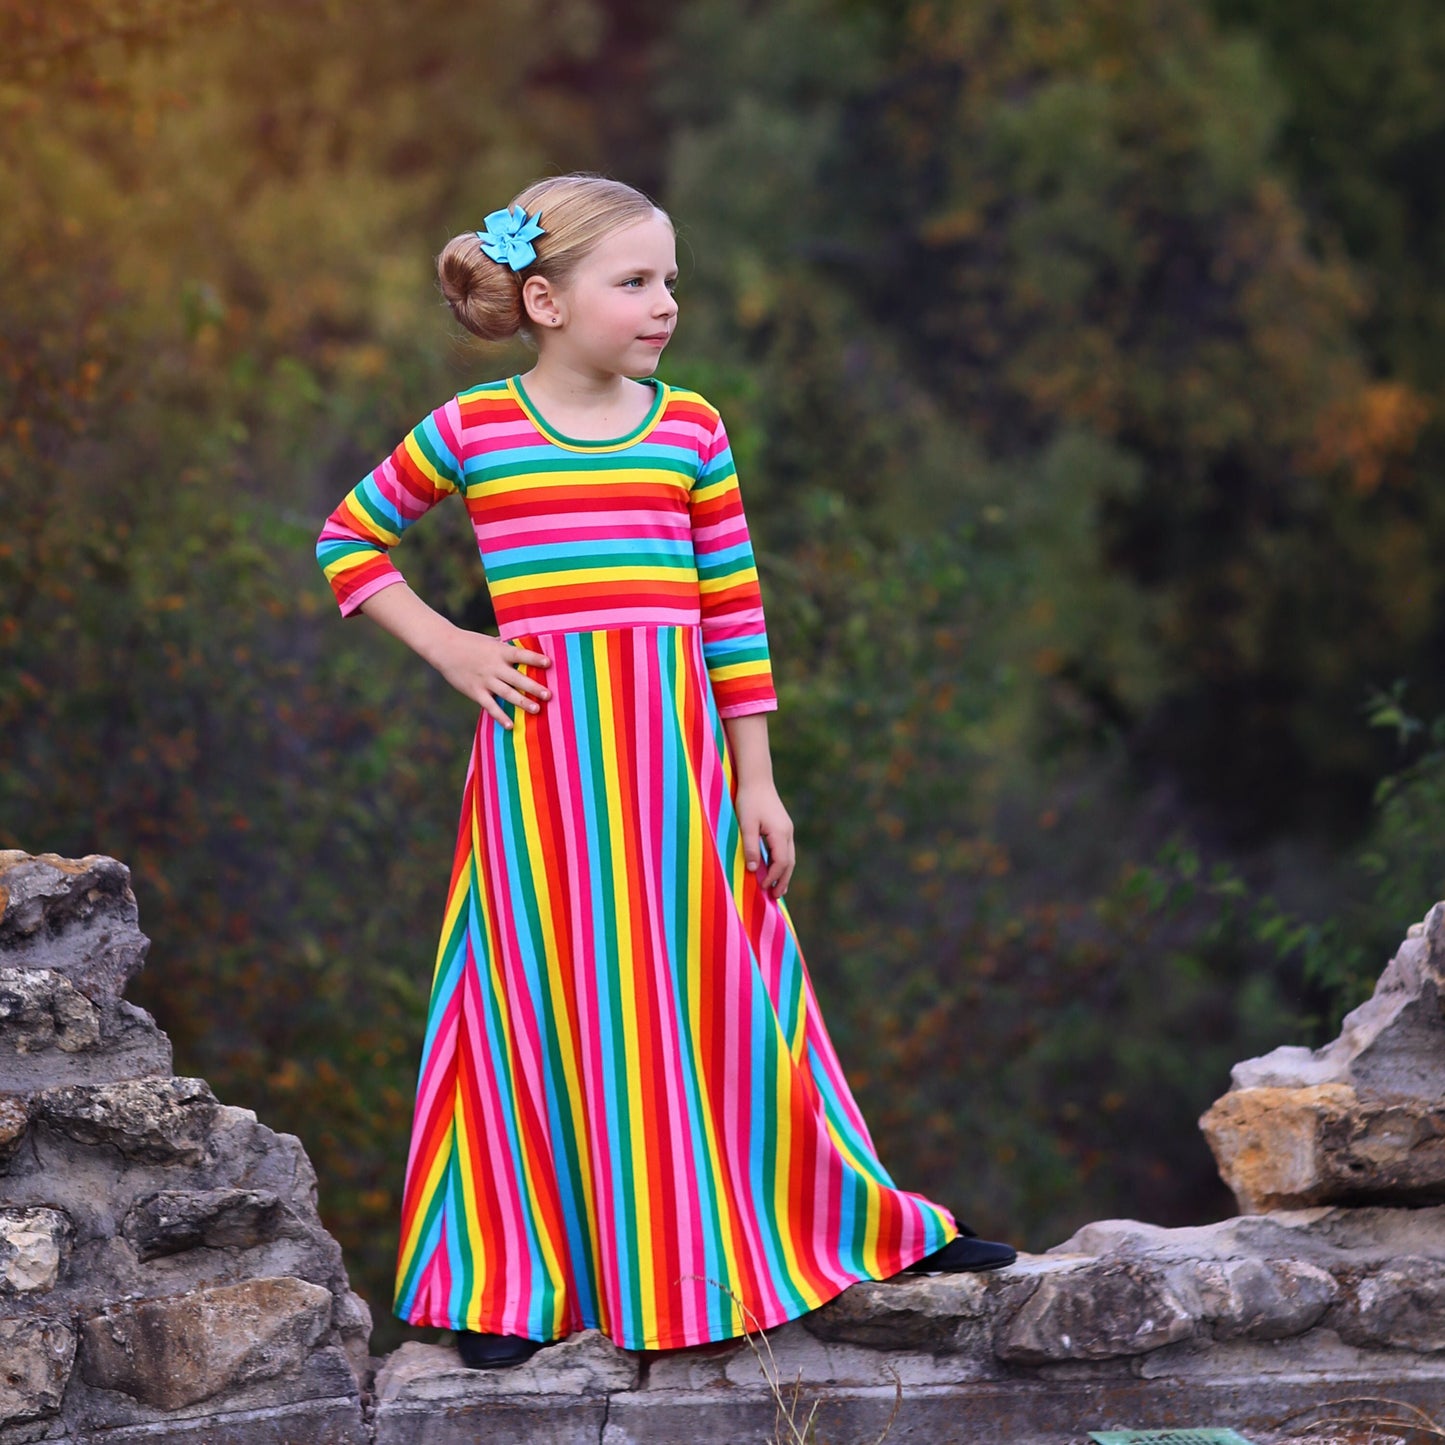 Girls Rainbow Maxi Dress- Maxi Dress, Gift for her, school dress, church dress, birthday gift, girl dress, casual dress, mom and me outfit